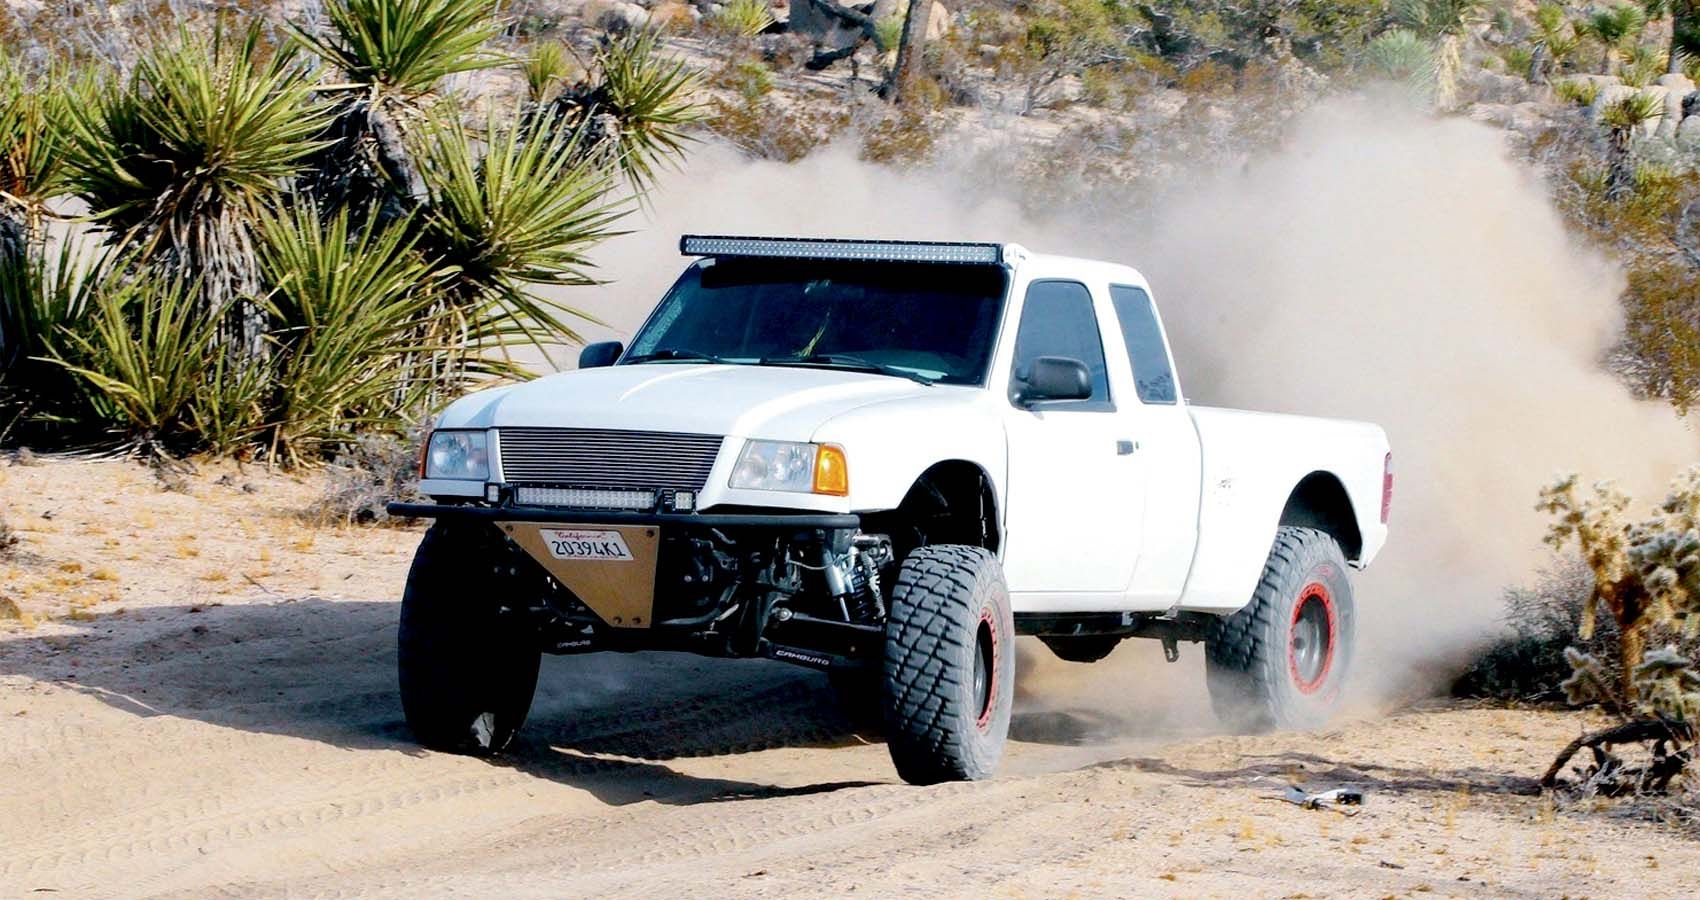 Cover-Ford-Ranger-Truck--2001-Off-Road-Desert-Baja-Modified-Lifted-rally-cheapest-2002-2003-2004-2005-2000-1999-1998-1